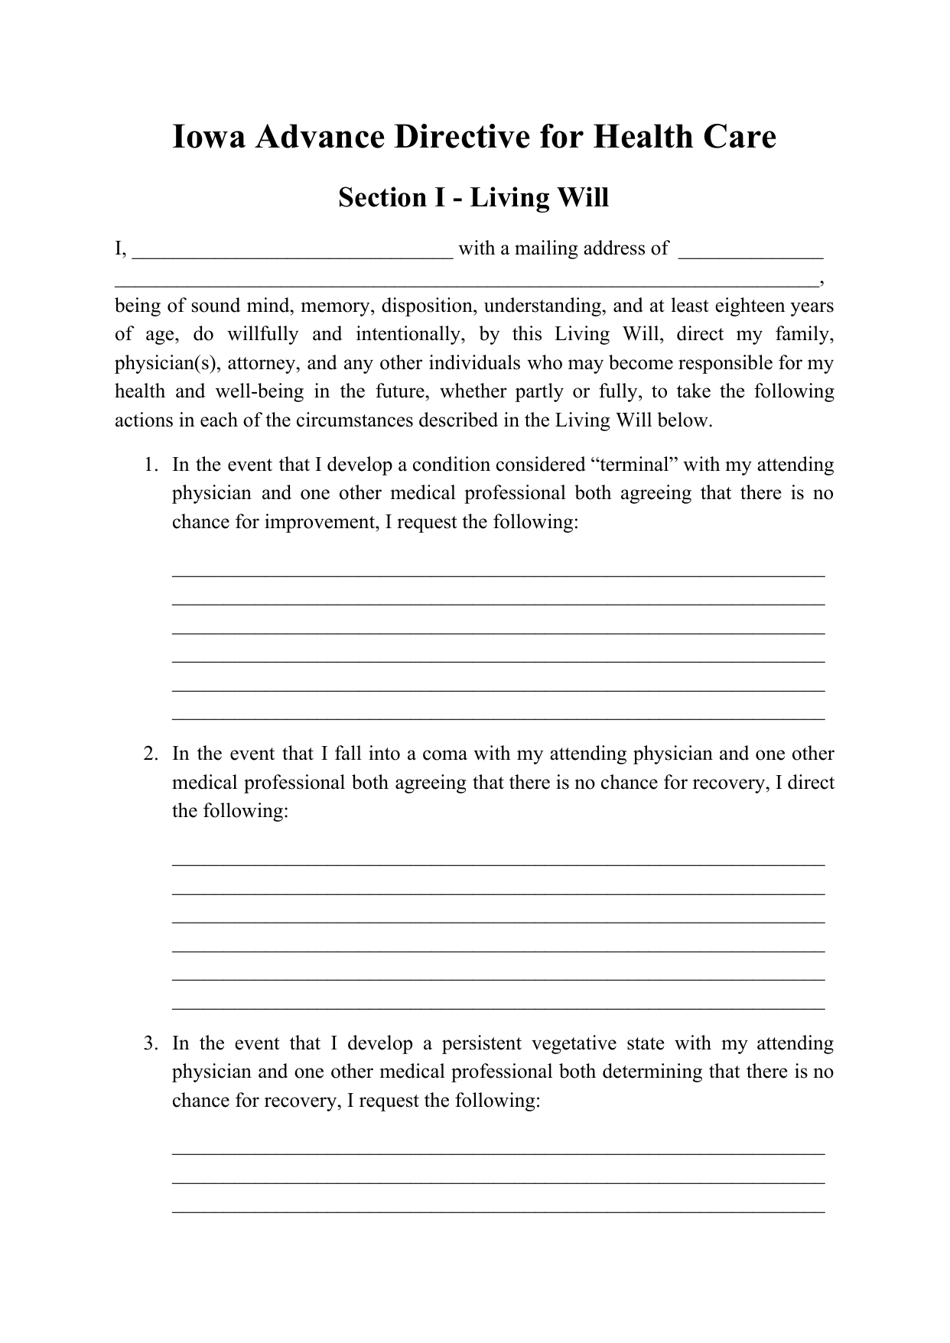 Advance Directive for Health Care Form - Iowa, Page 1